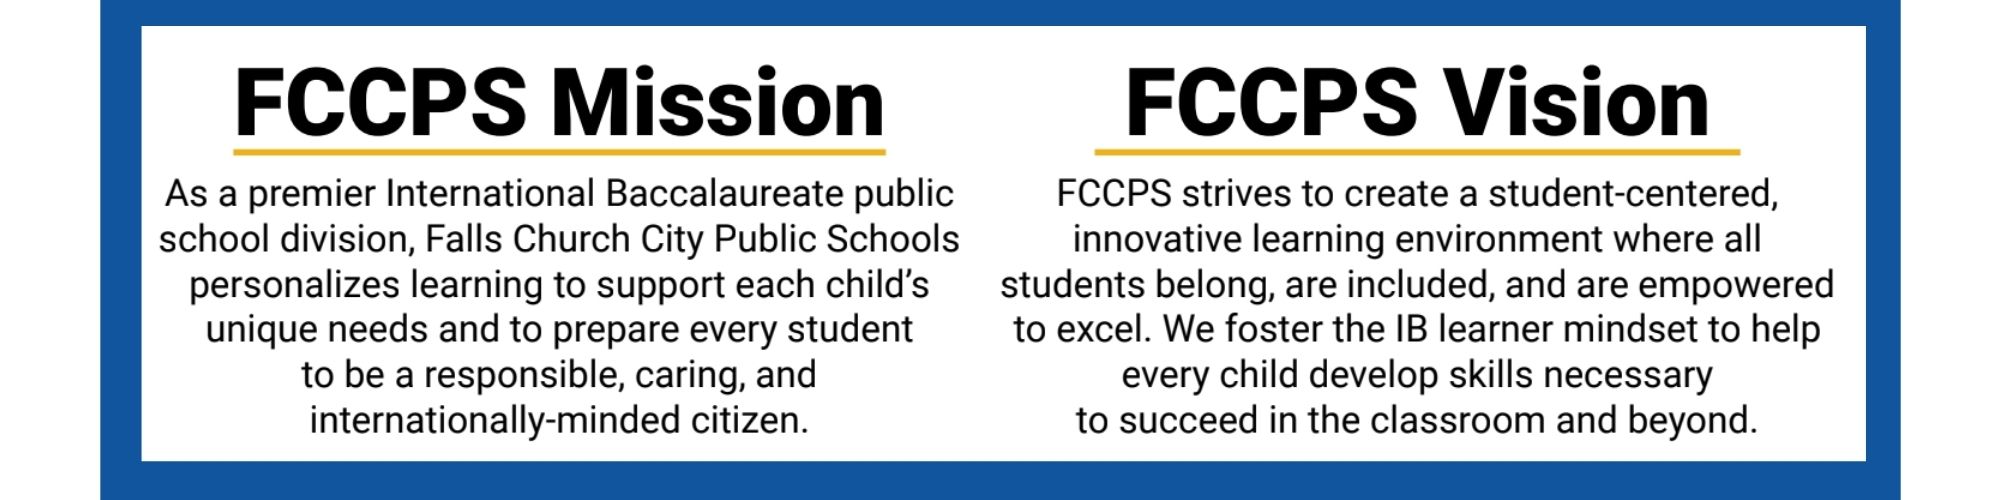 FCCPS Mission and Vision